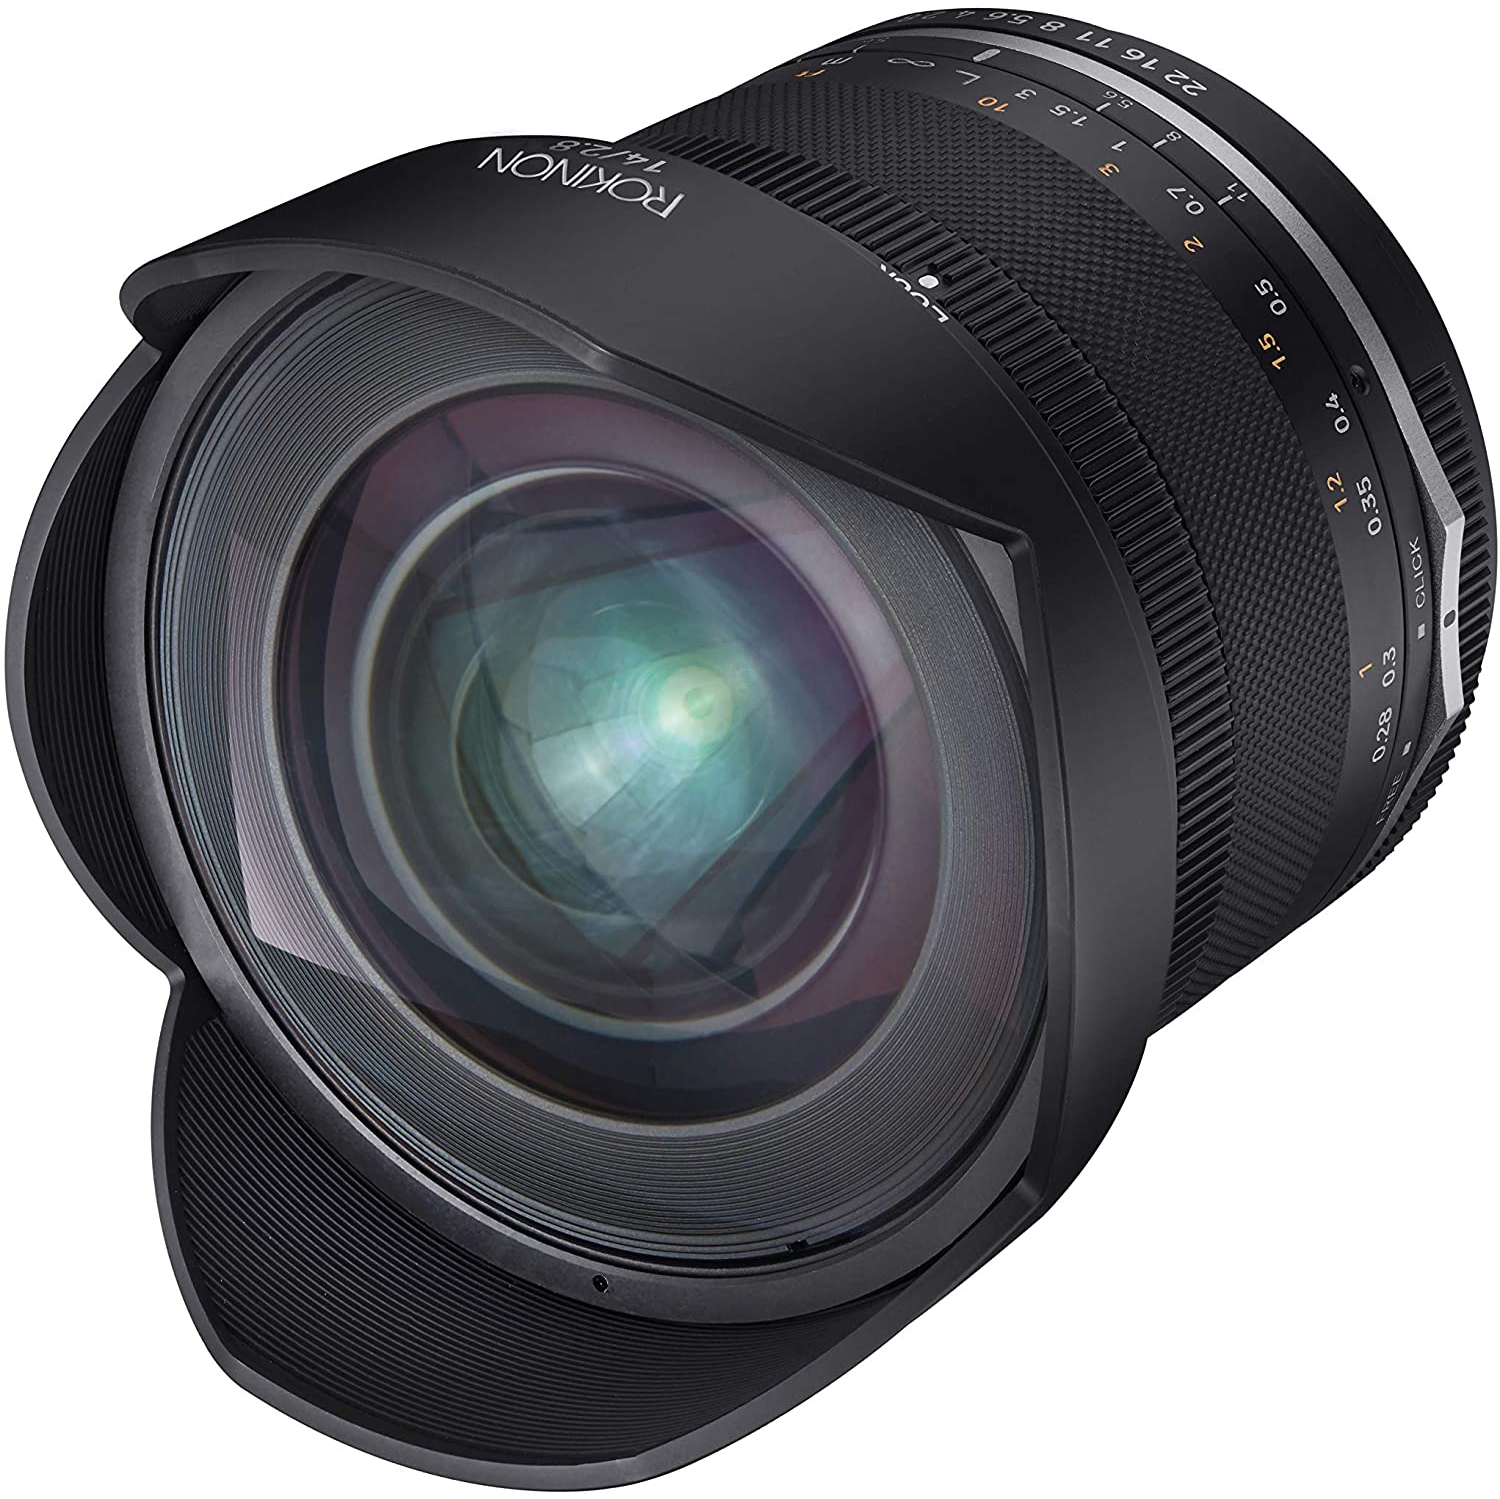 Rokinon Series II 14mm F2.8 Weather Sealed Ultra Wide Angle Lens for Nikon with Built-in AE Chip